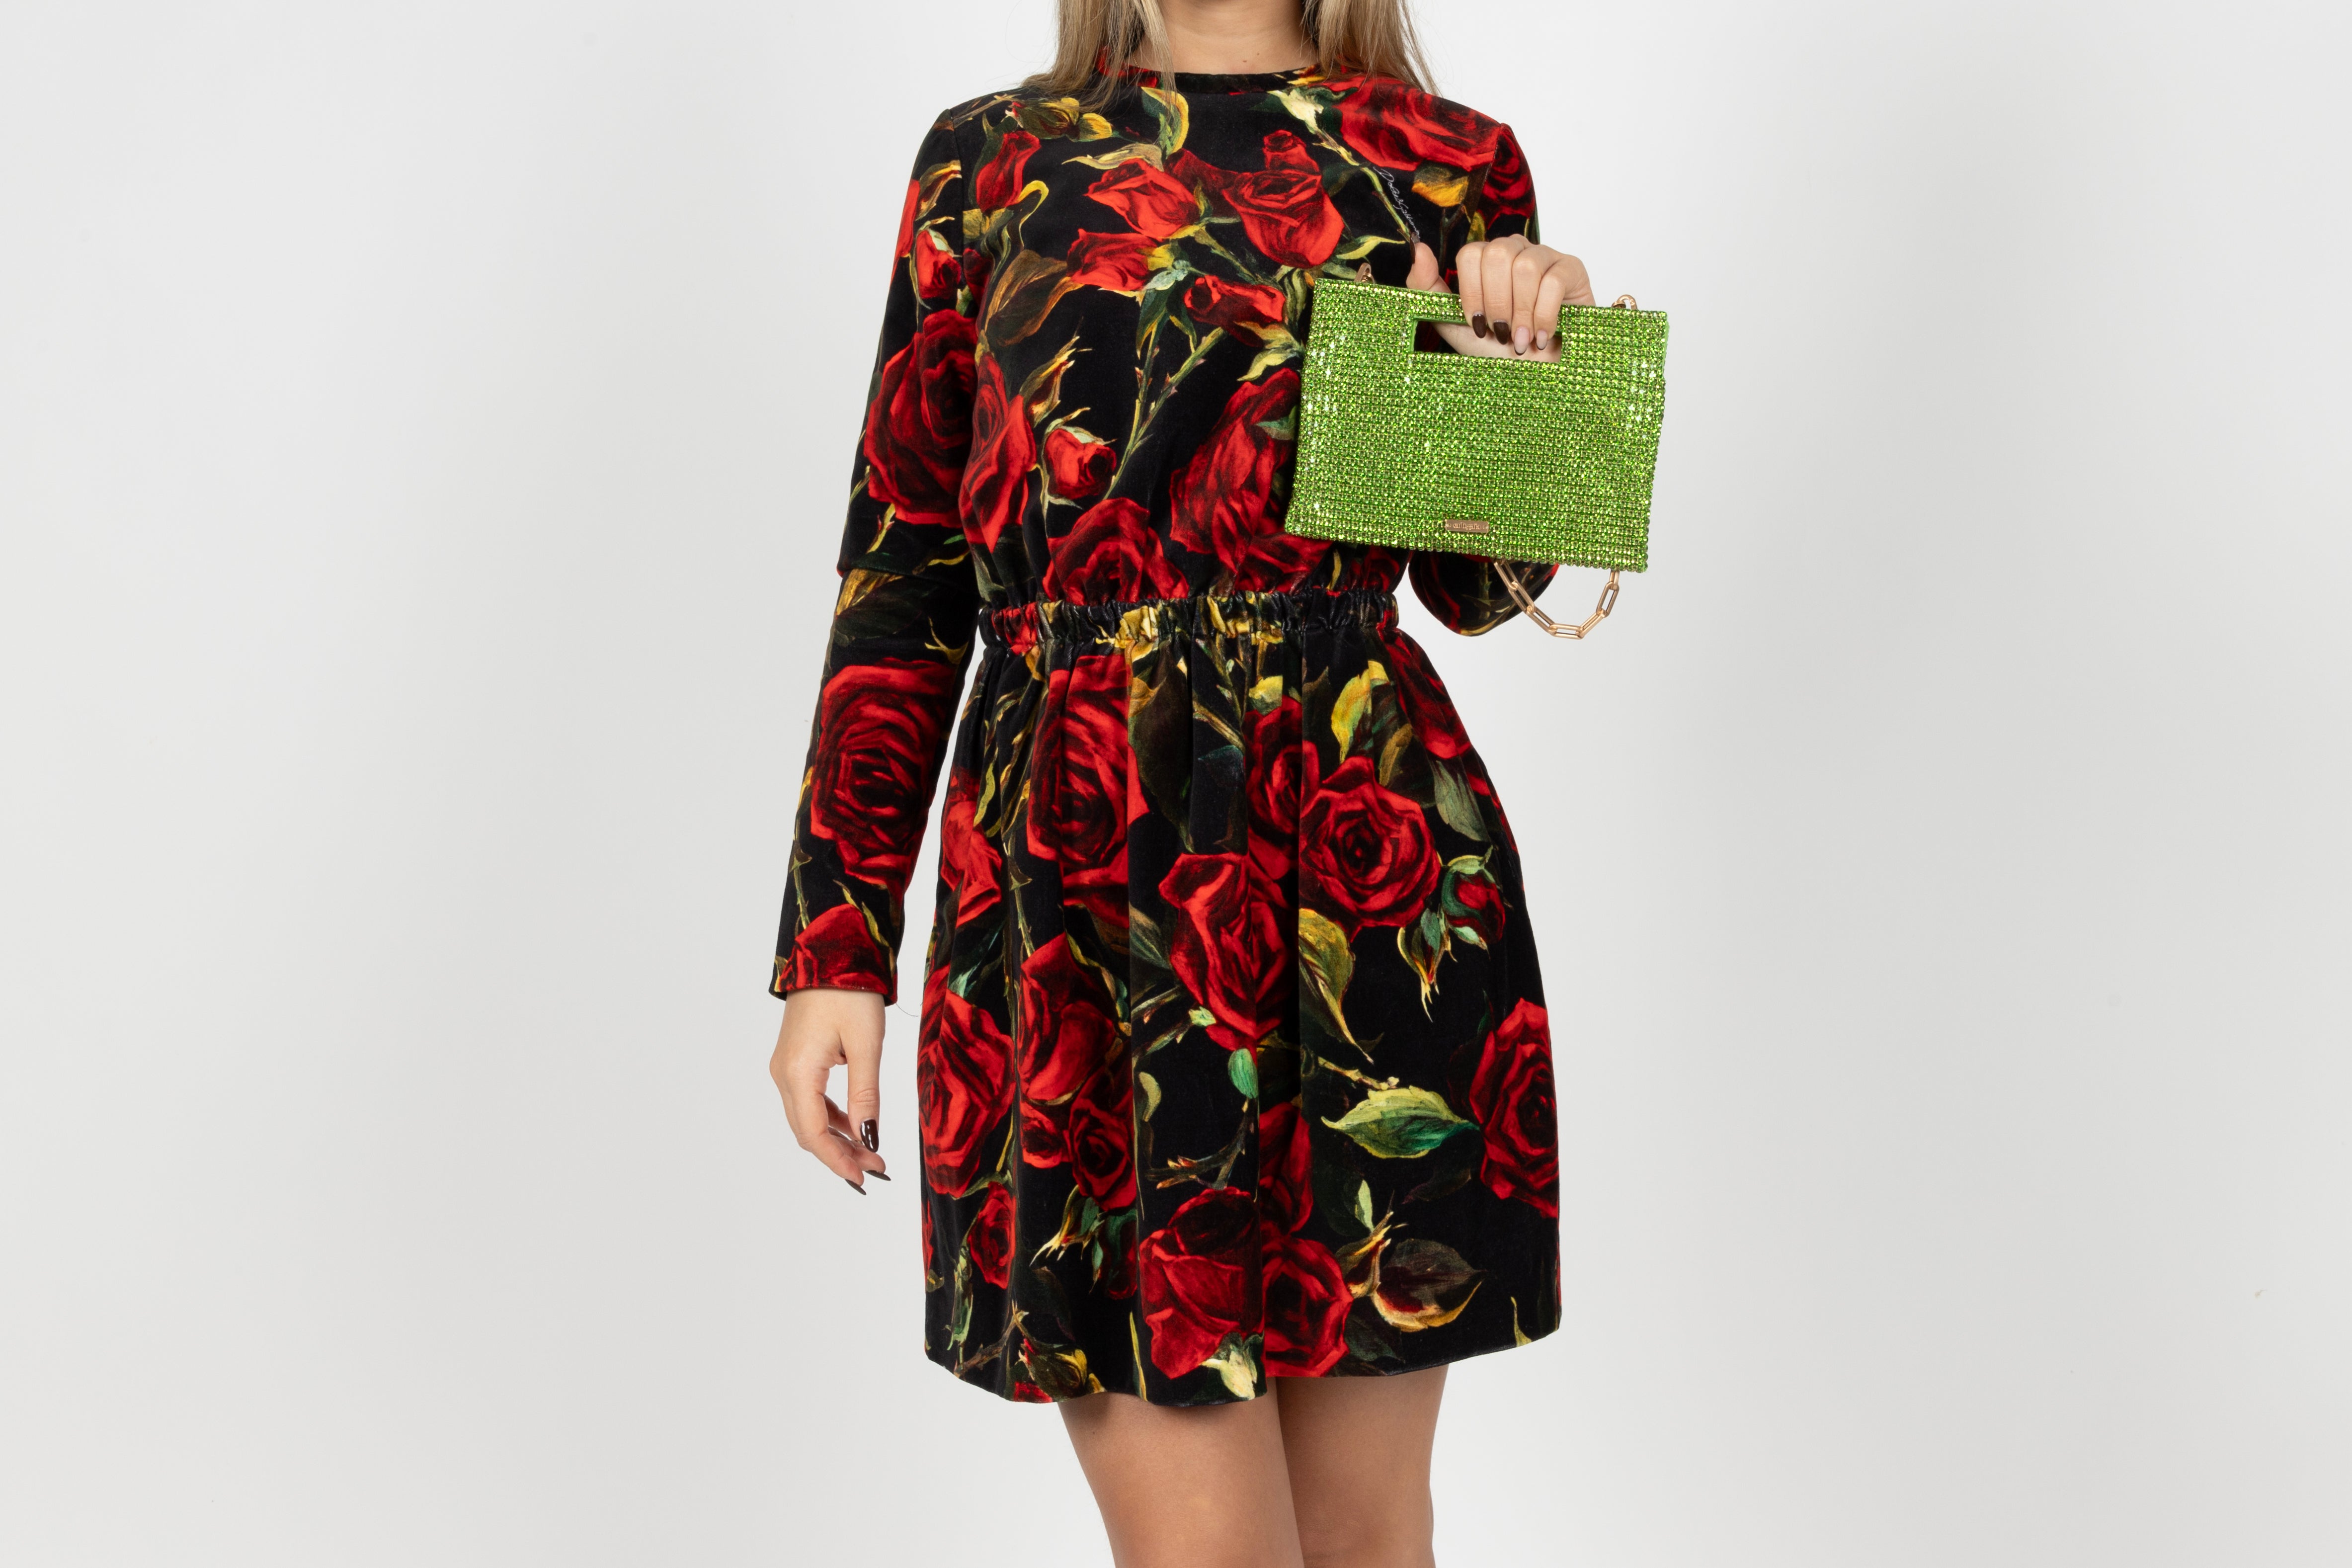 Dolce & Gabbana Dress with Red Roses – Something Borrowed